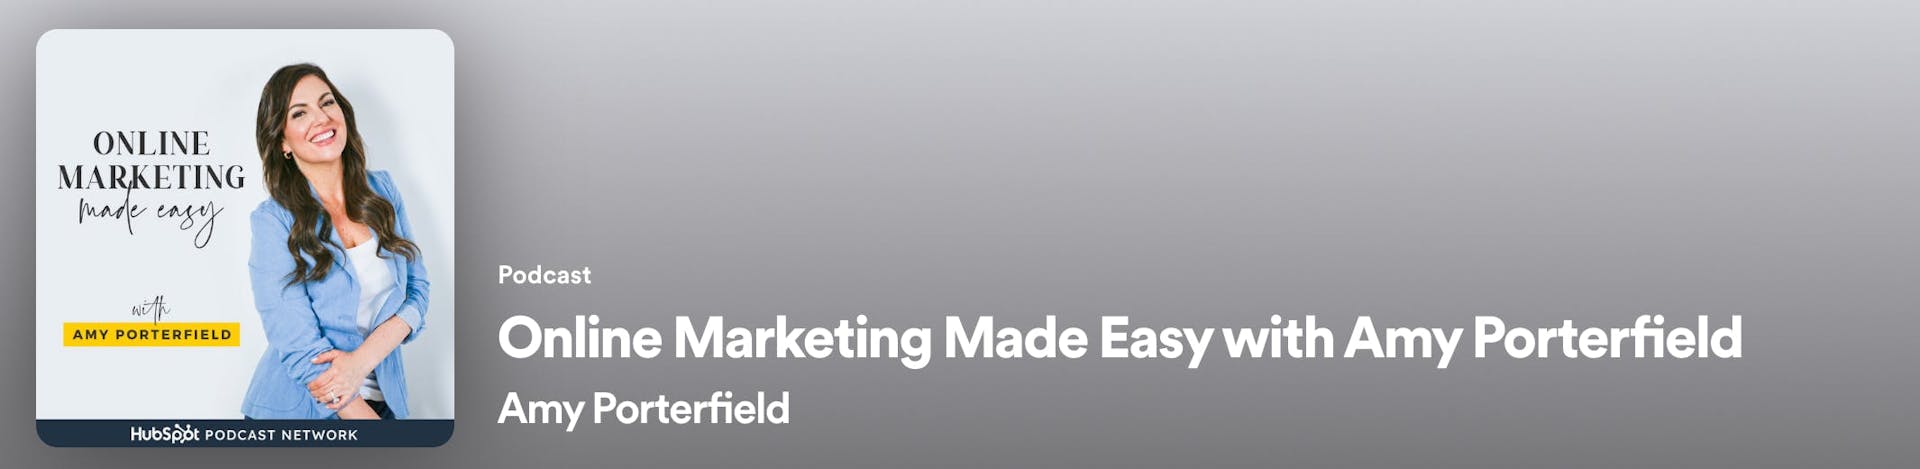 Podcast Online Marketing Made Easy 